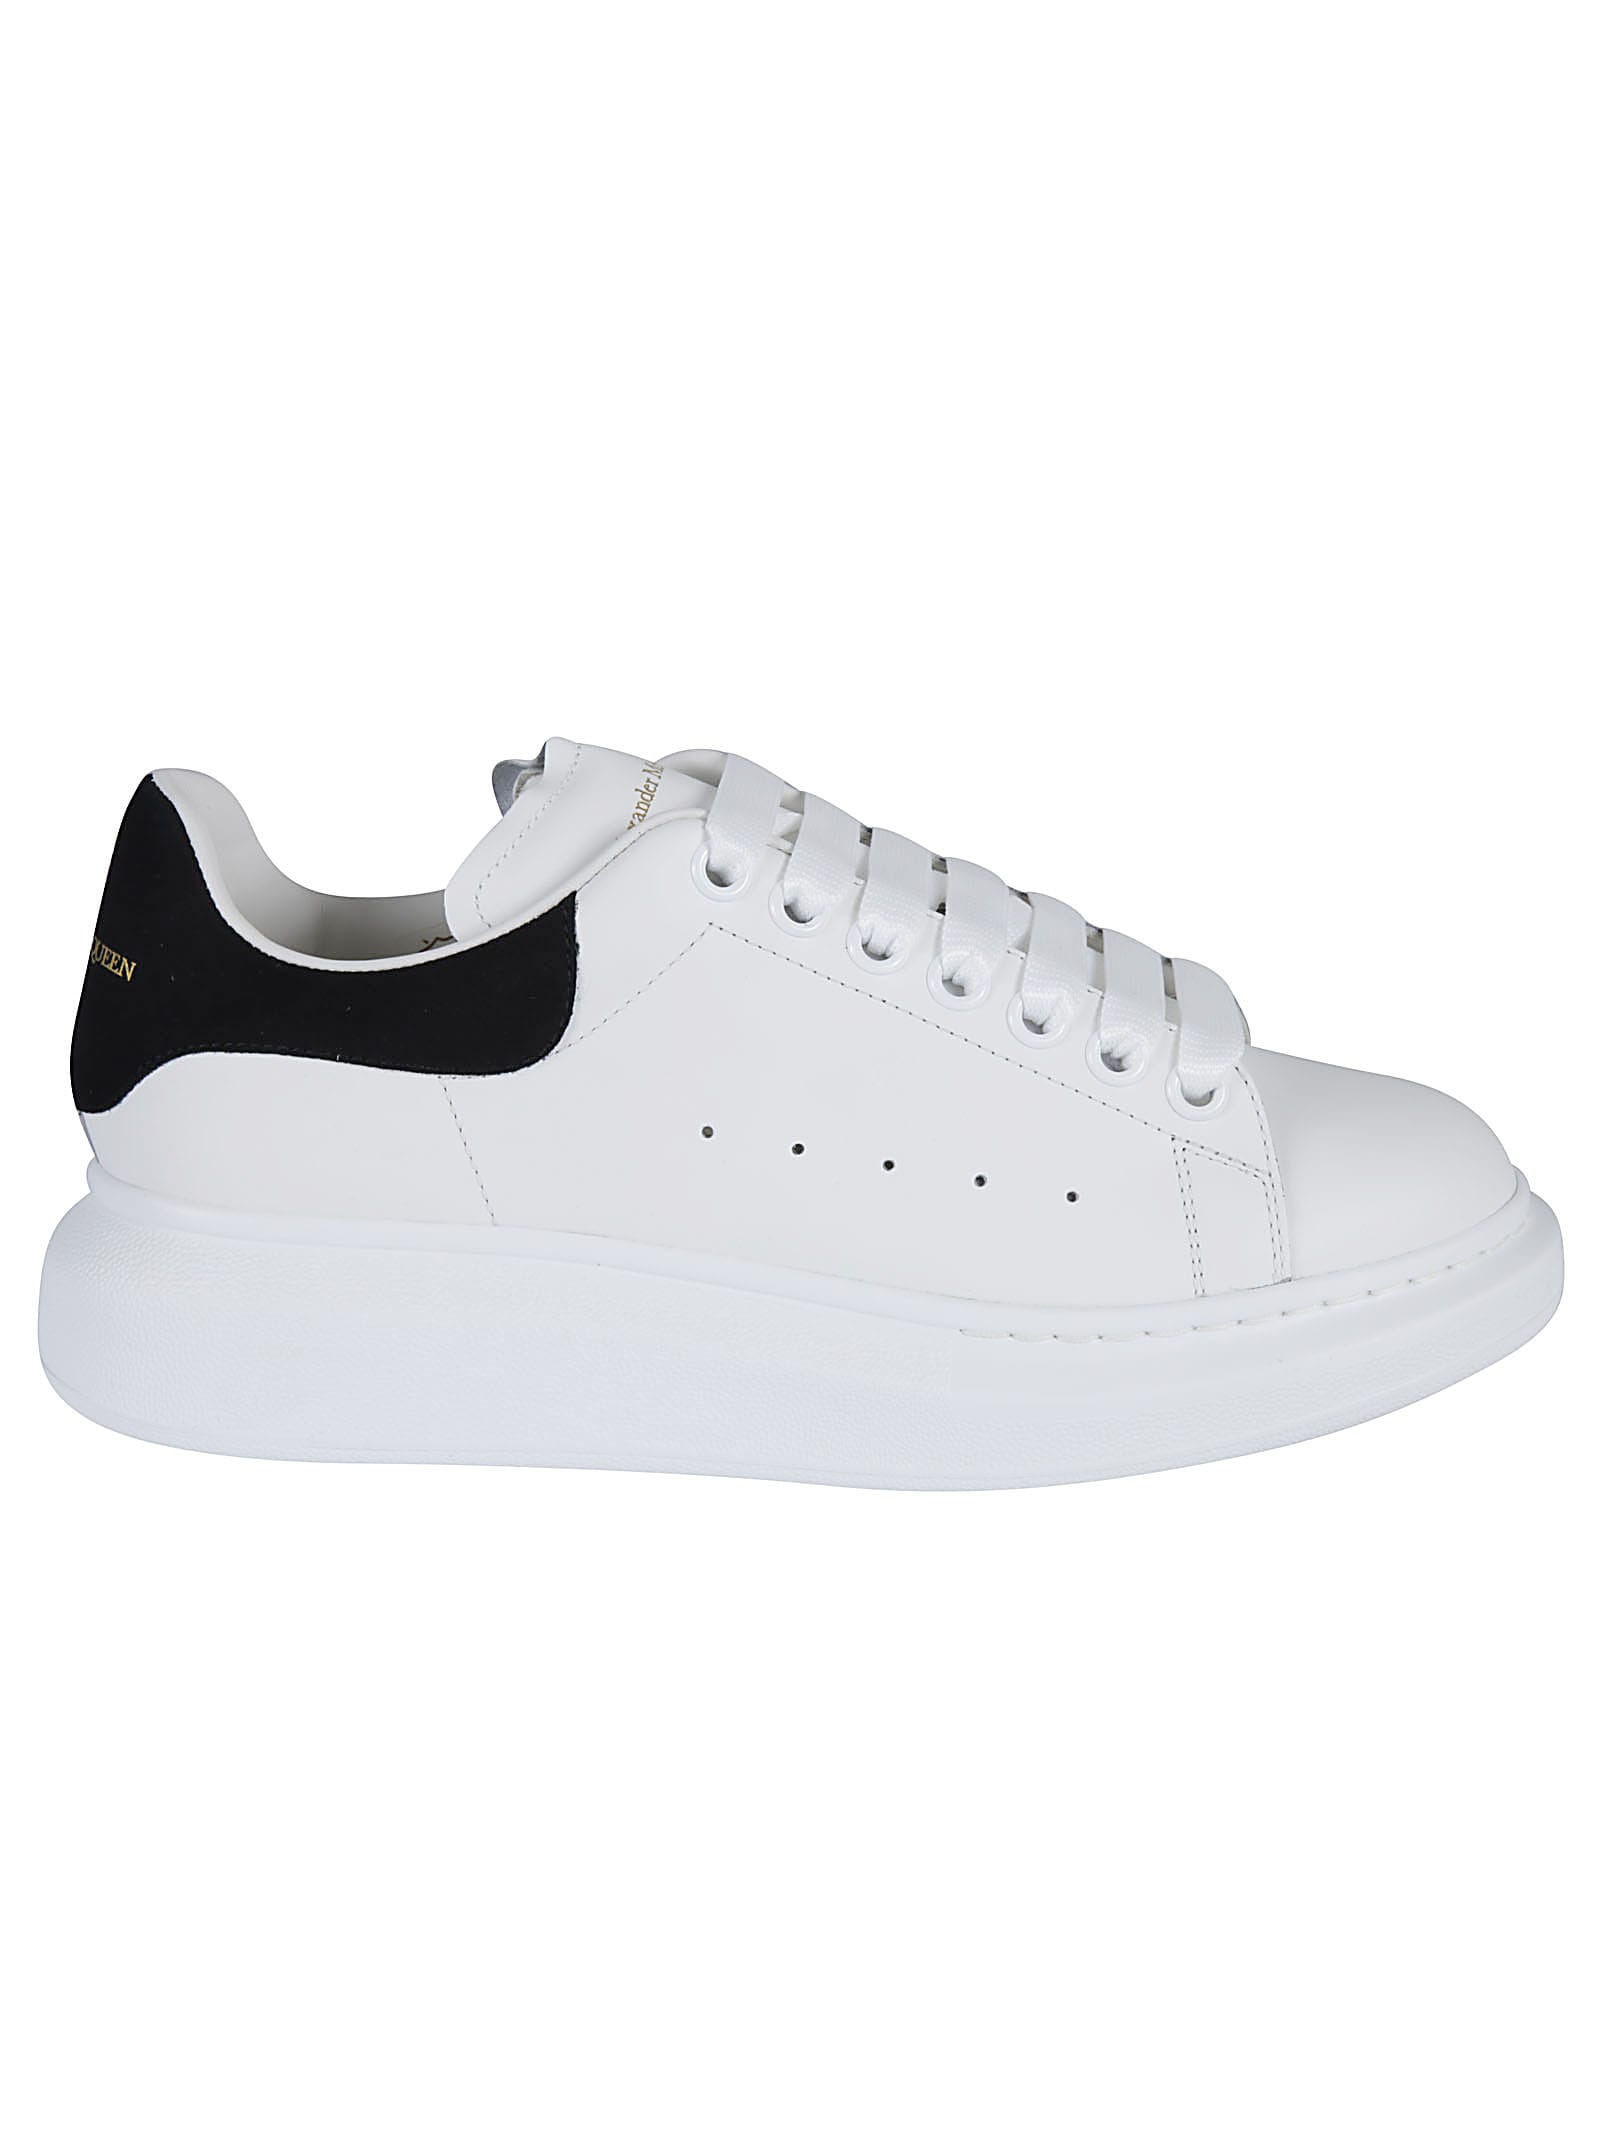 Alexander McQueen Round Toe Classic Lace-up Sneakers